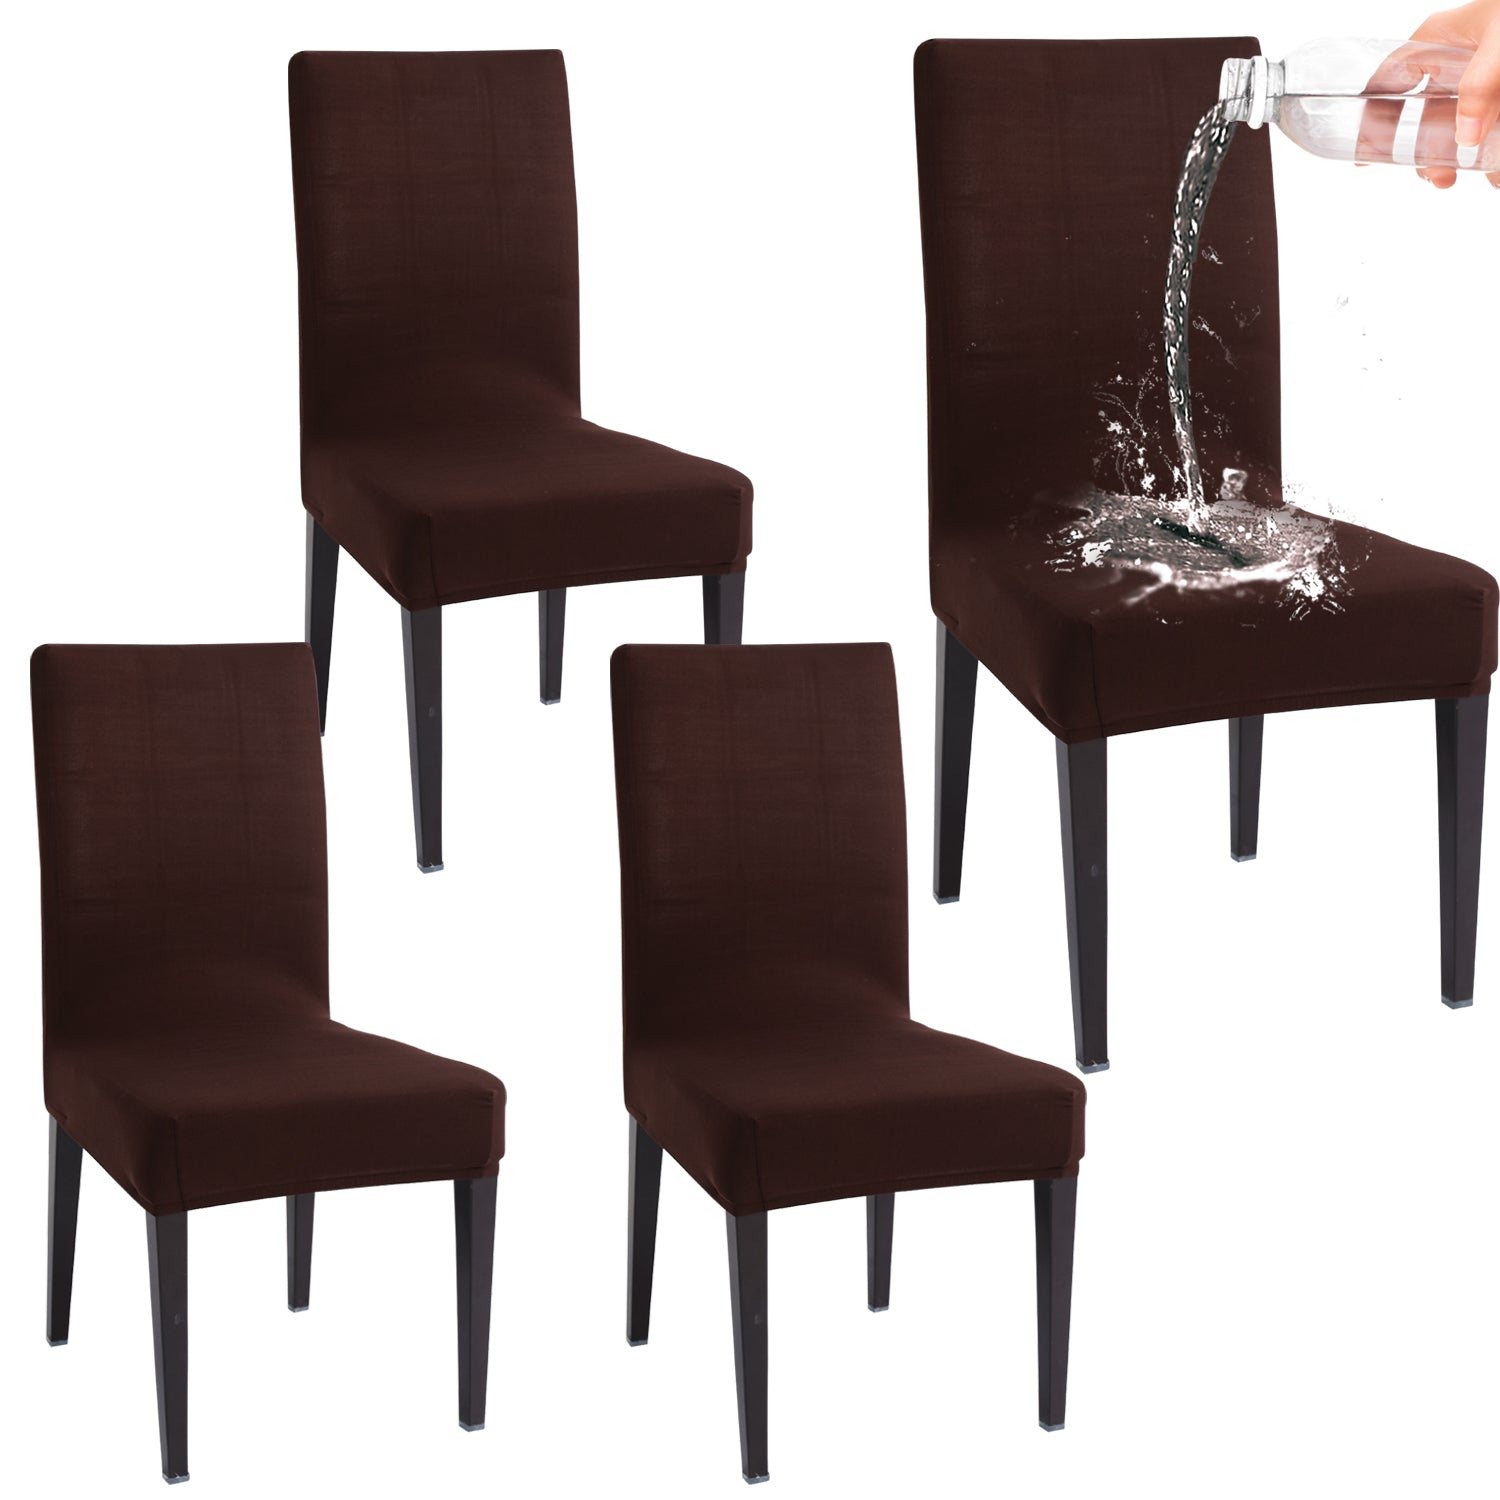 Elastic Stretchable Water Resistant Dining Chair Cover, Brown